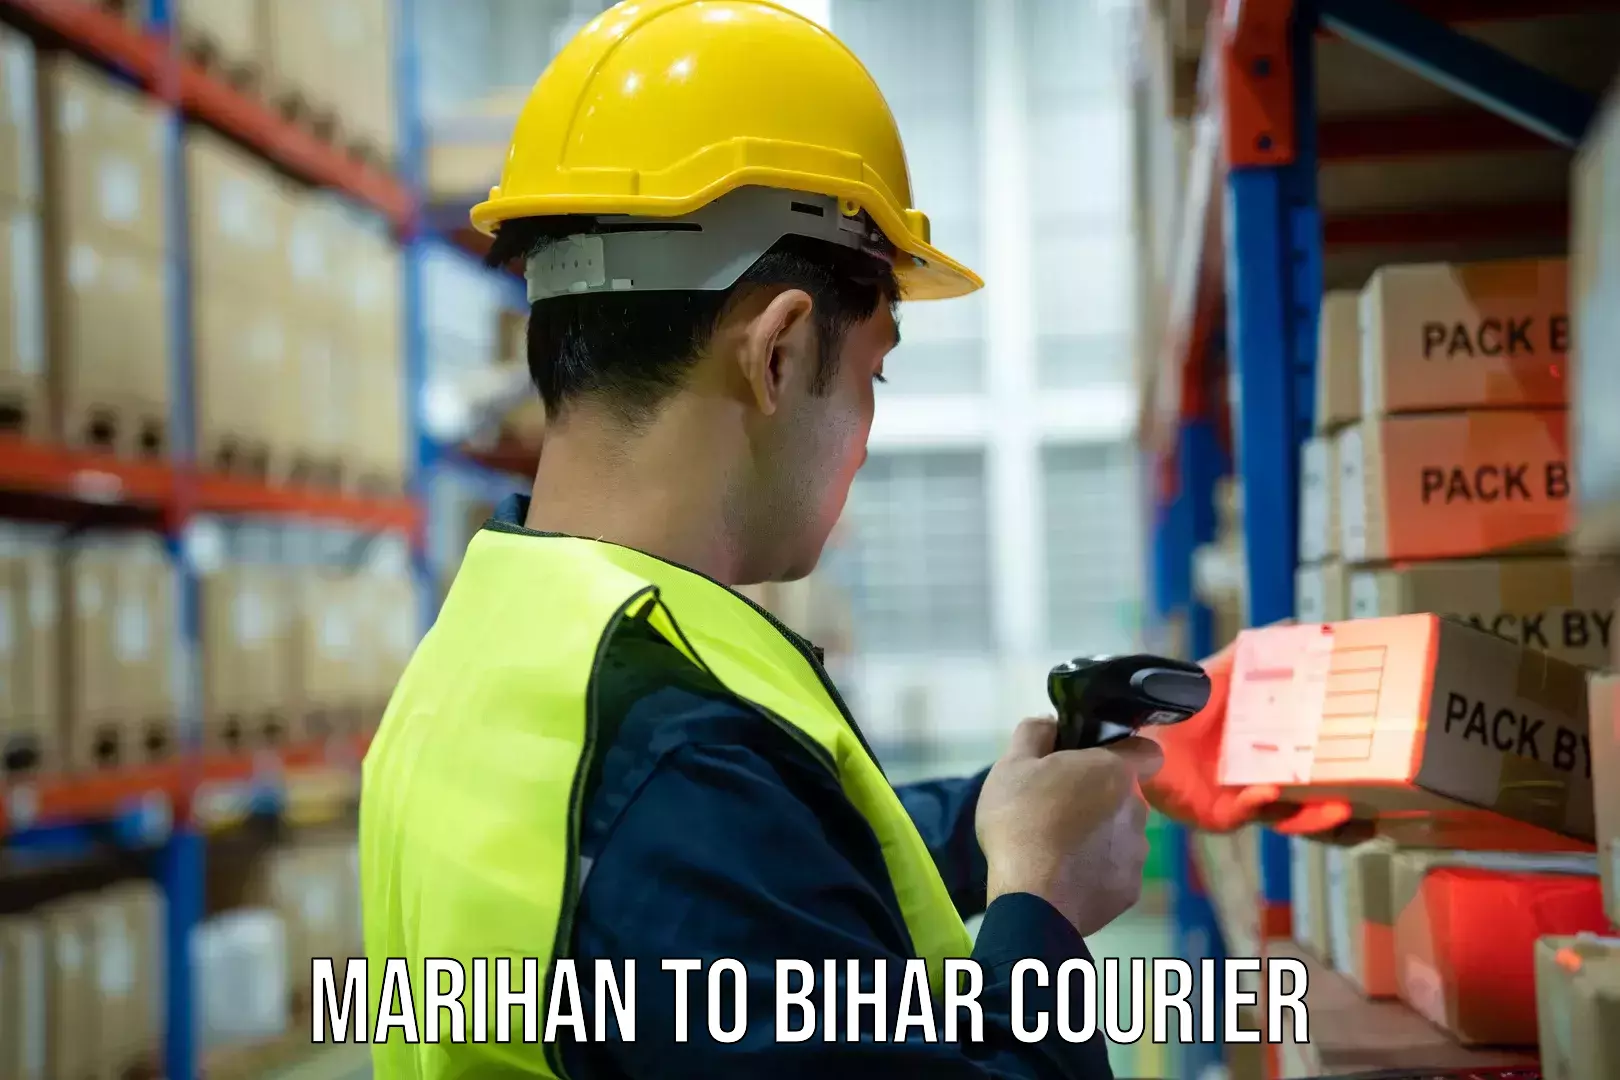 Express delivery solutions Marihan to Piro